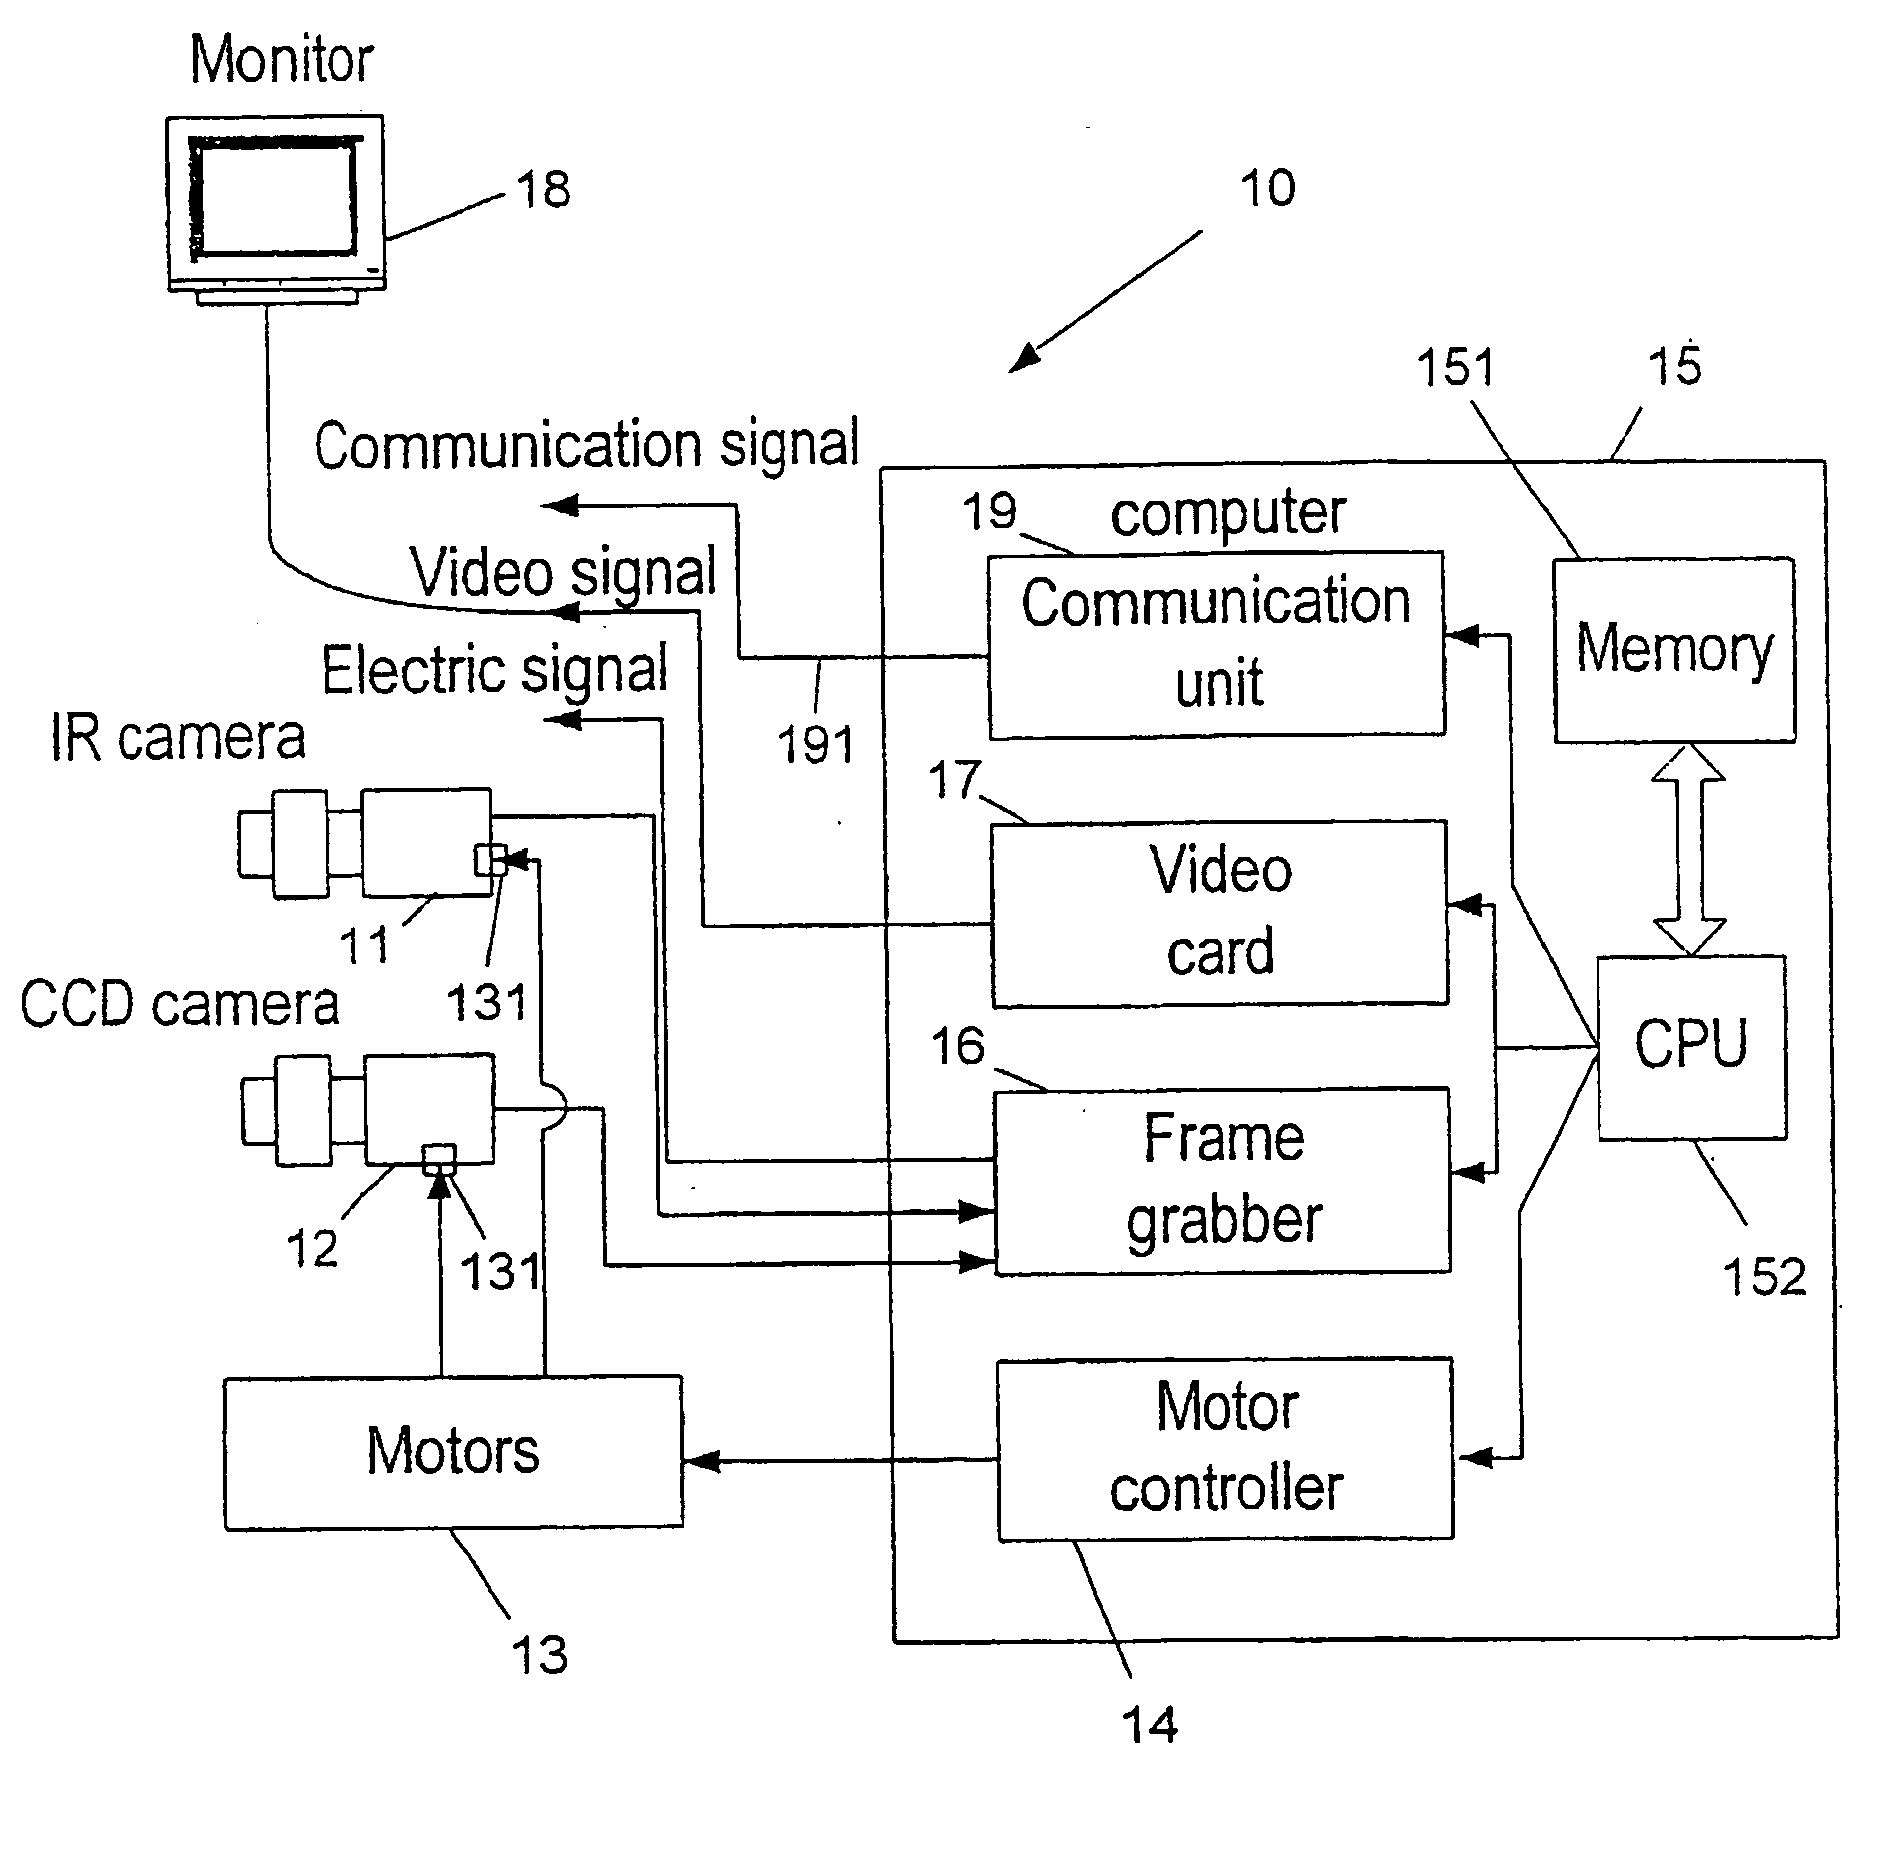 Method and apparatus for implementing multipurpose monitoring system